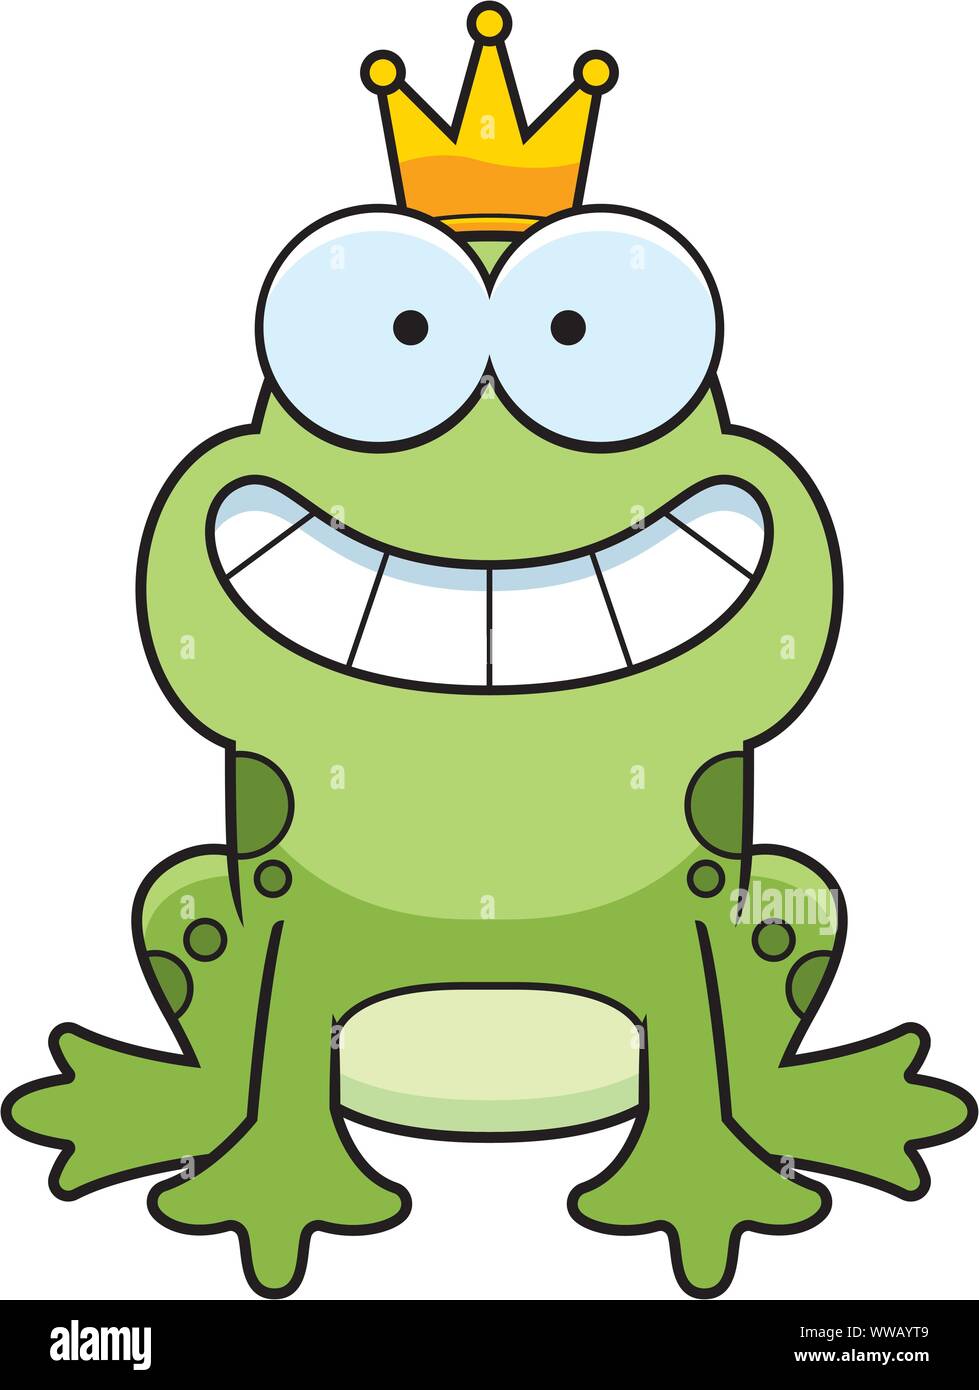 A cartoon frog prince smiling and happy. Stock Vector